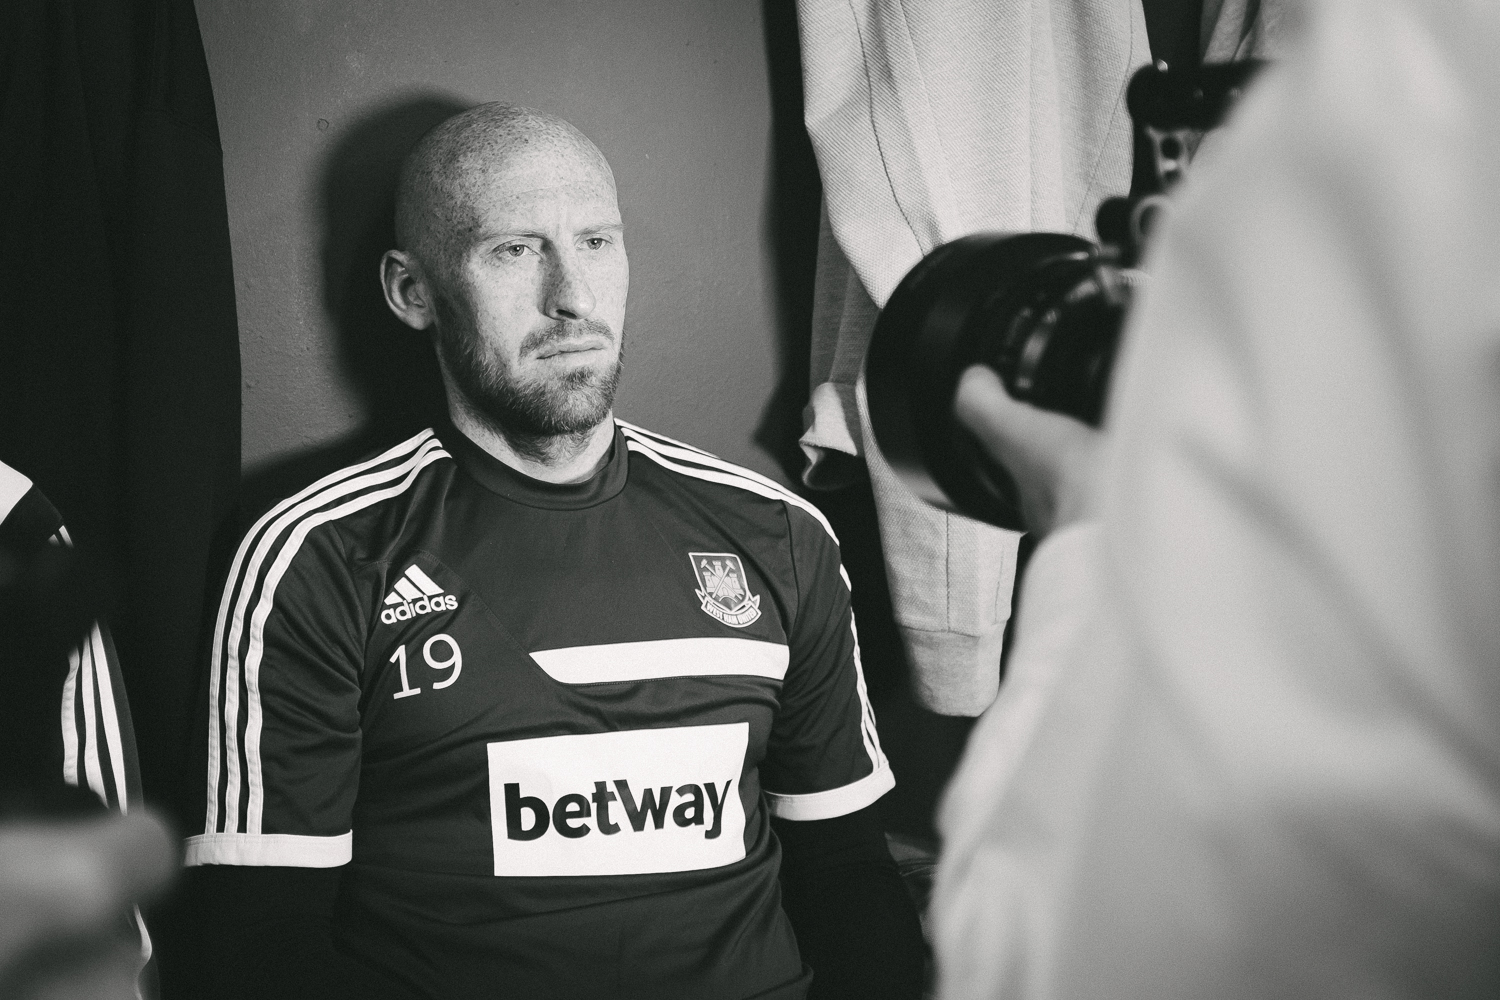 Betway_WestHam_Alex_Wallace_Photography_0050.jpg